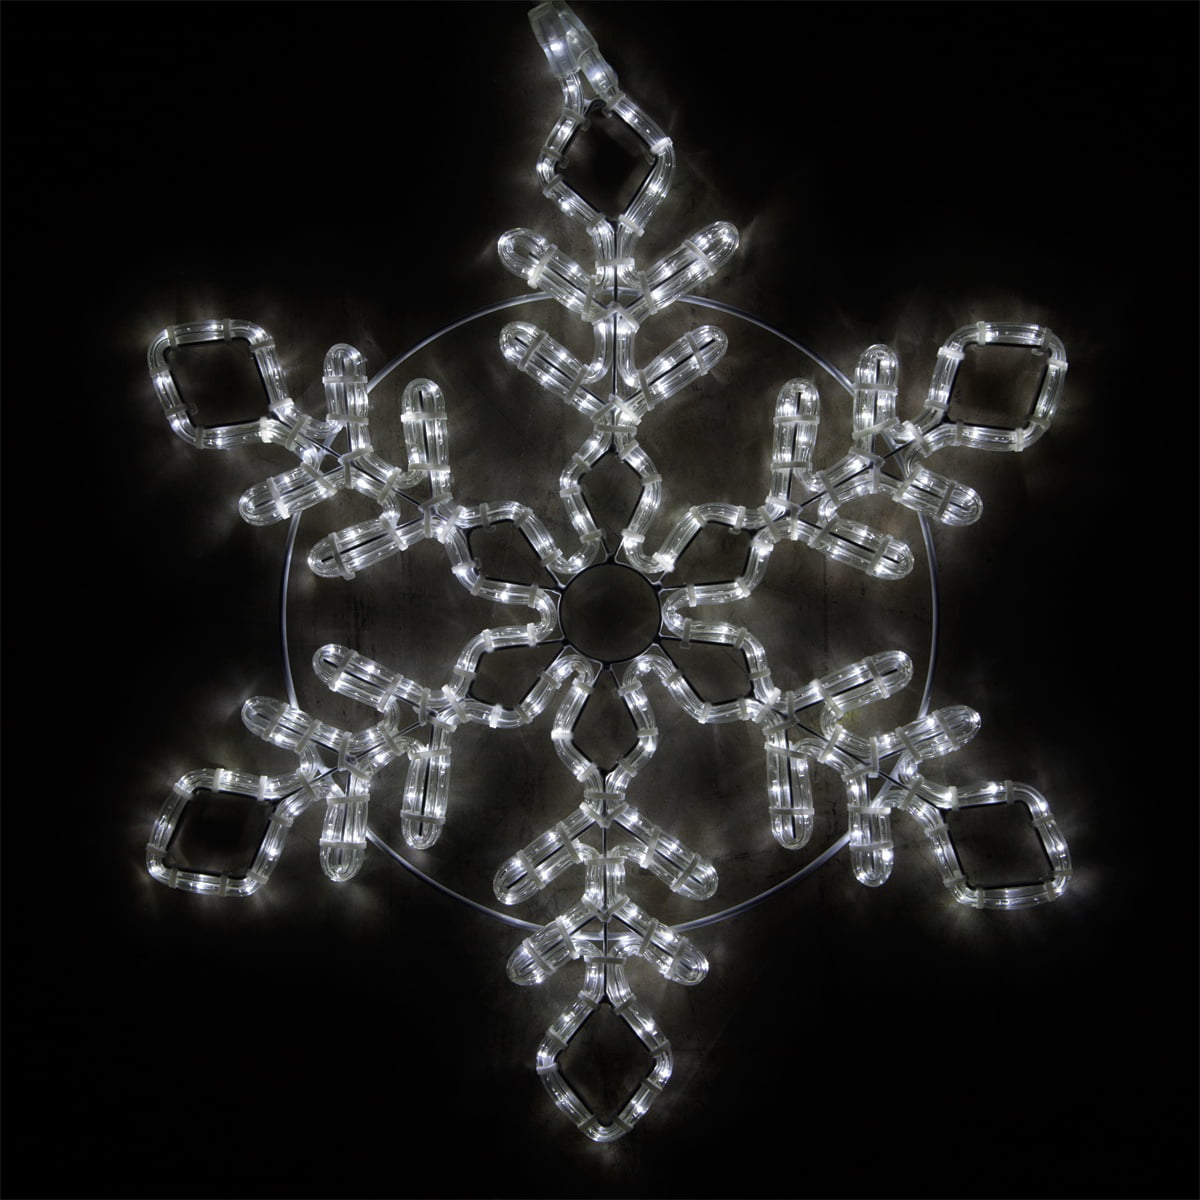 Details about   CHRISTMAS LED MULTI-COLOR SNOWING ICICLE LAMP PARTY WEDDING XMAS OUTDOOR LIGHTS 